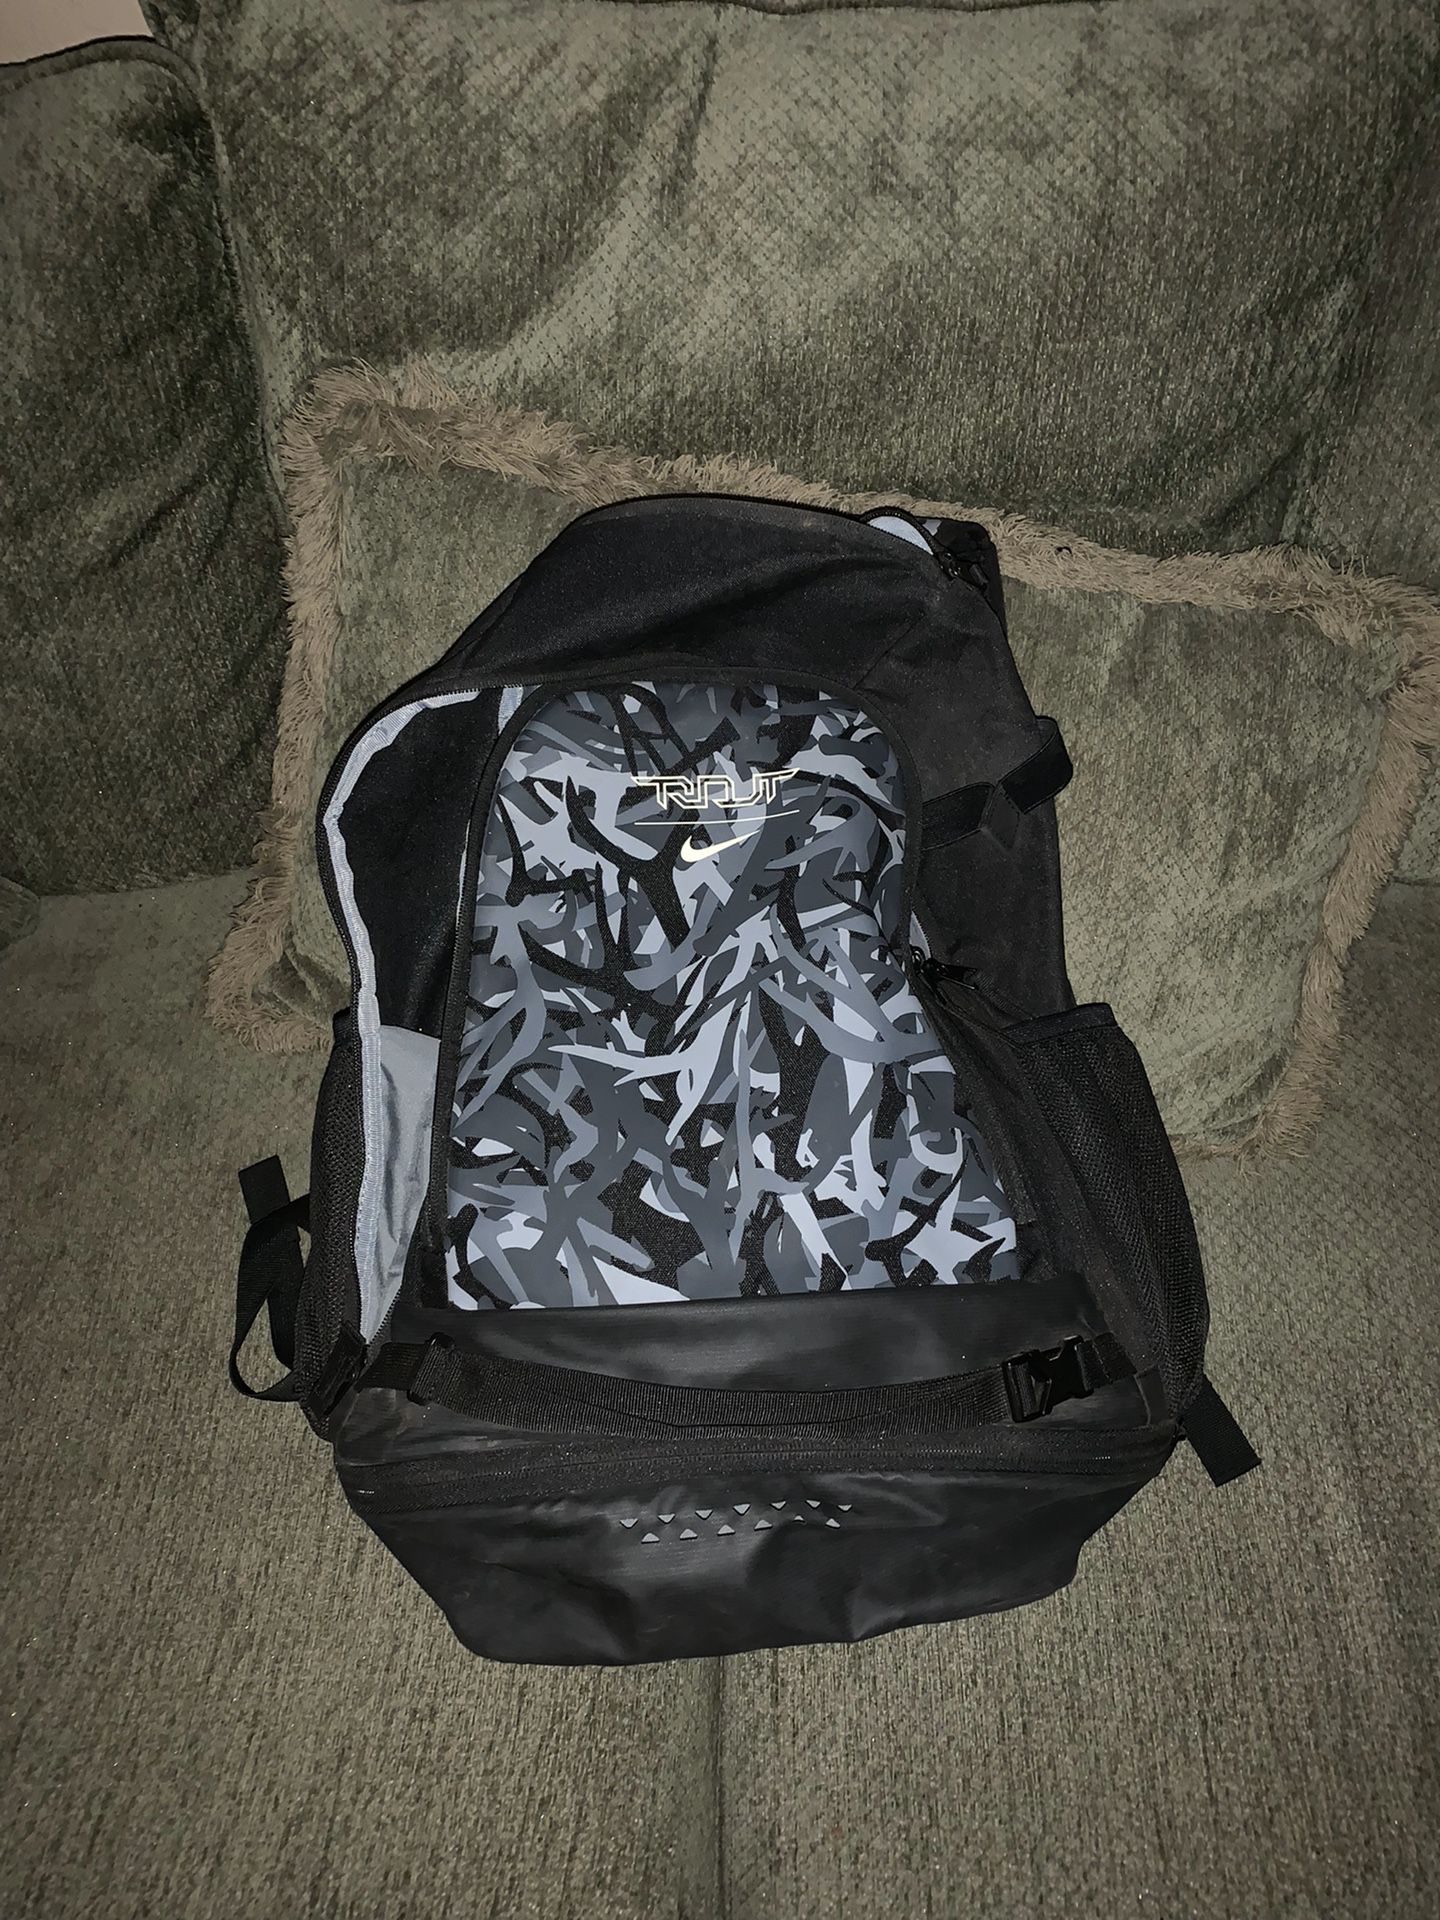 Nike Trout backpack